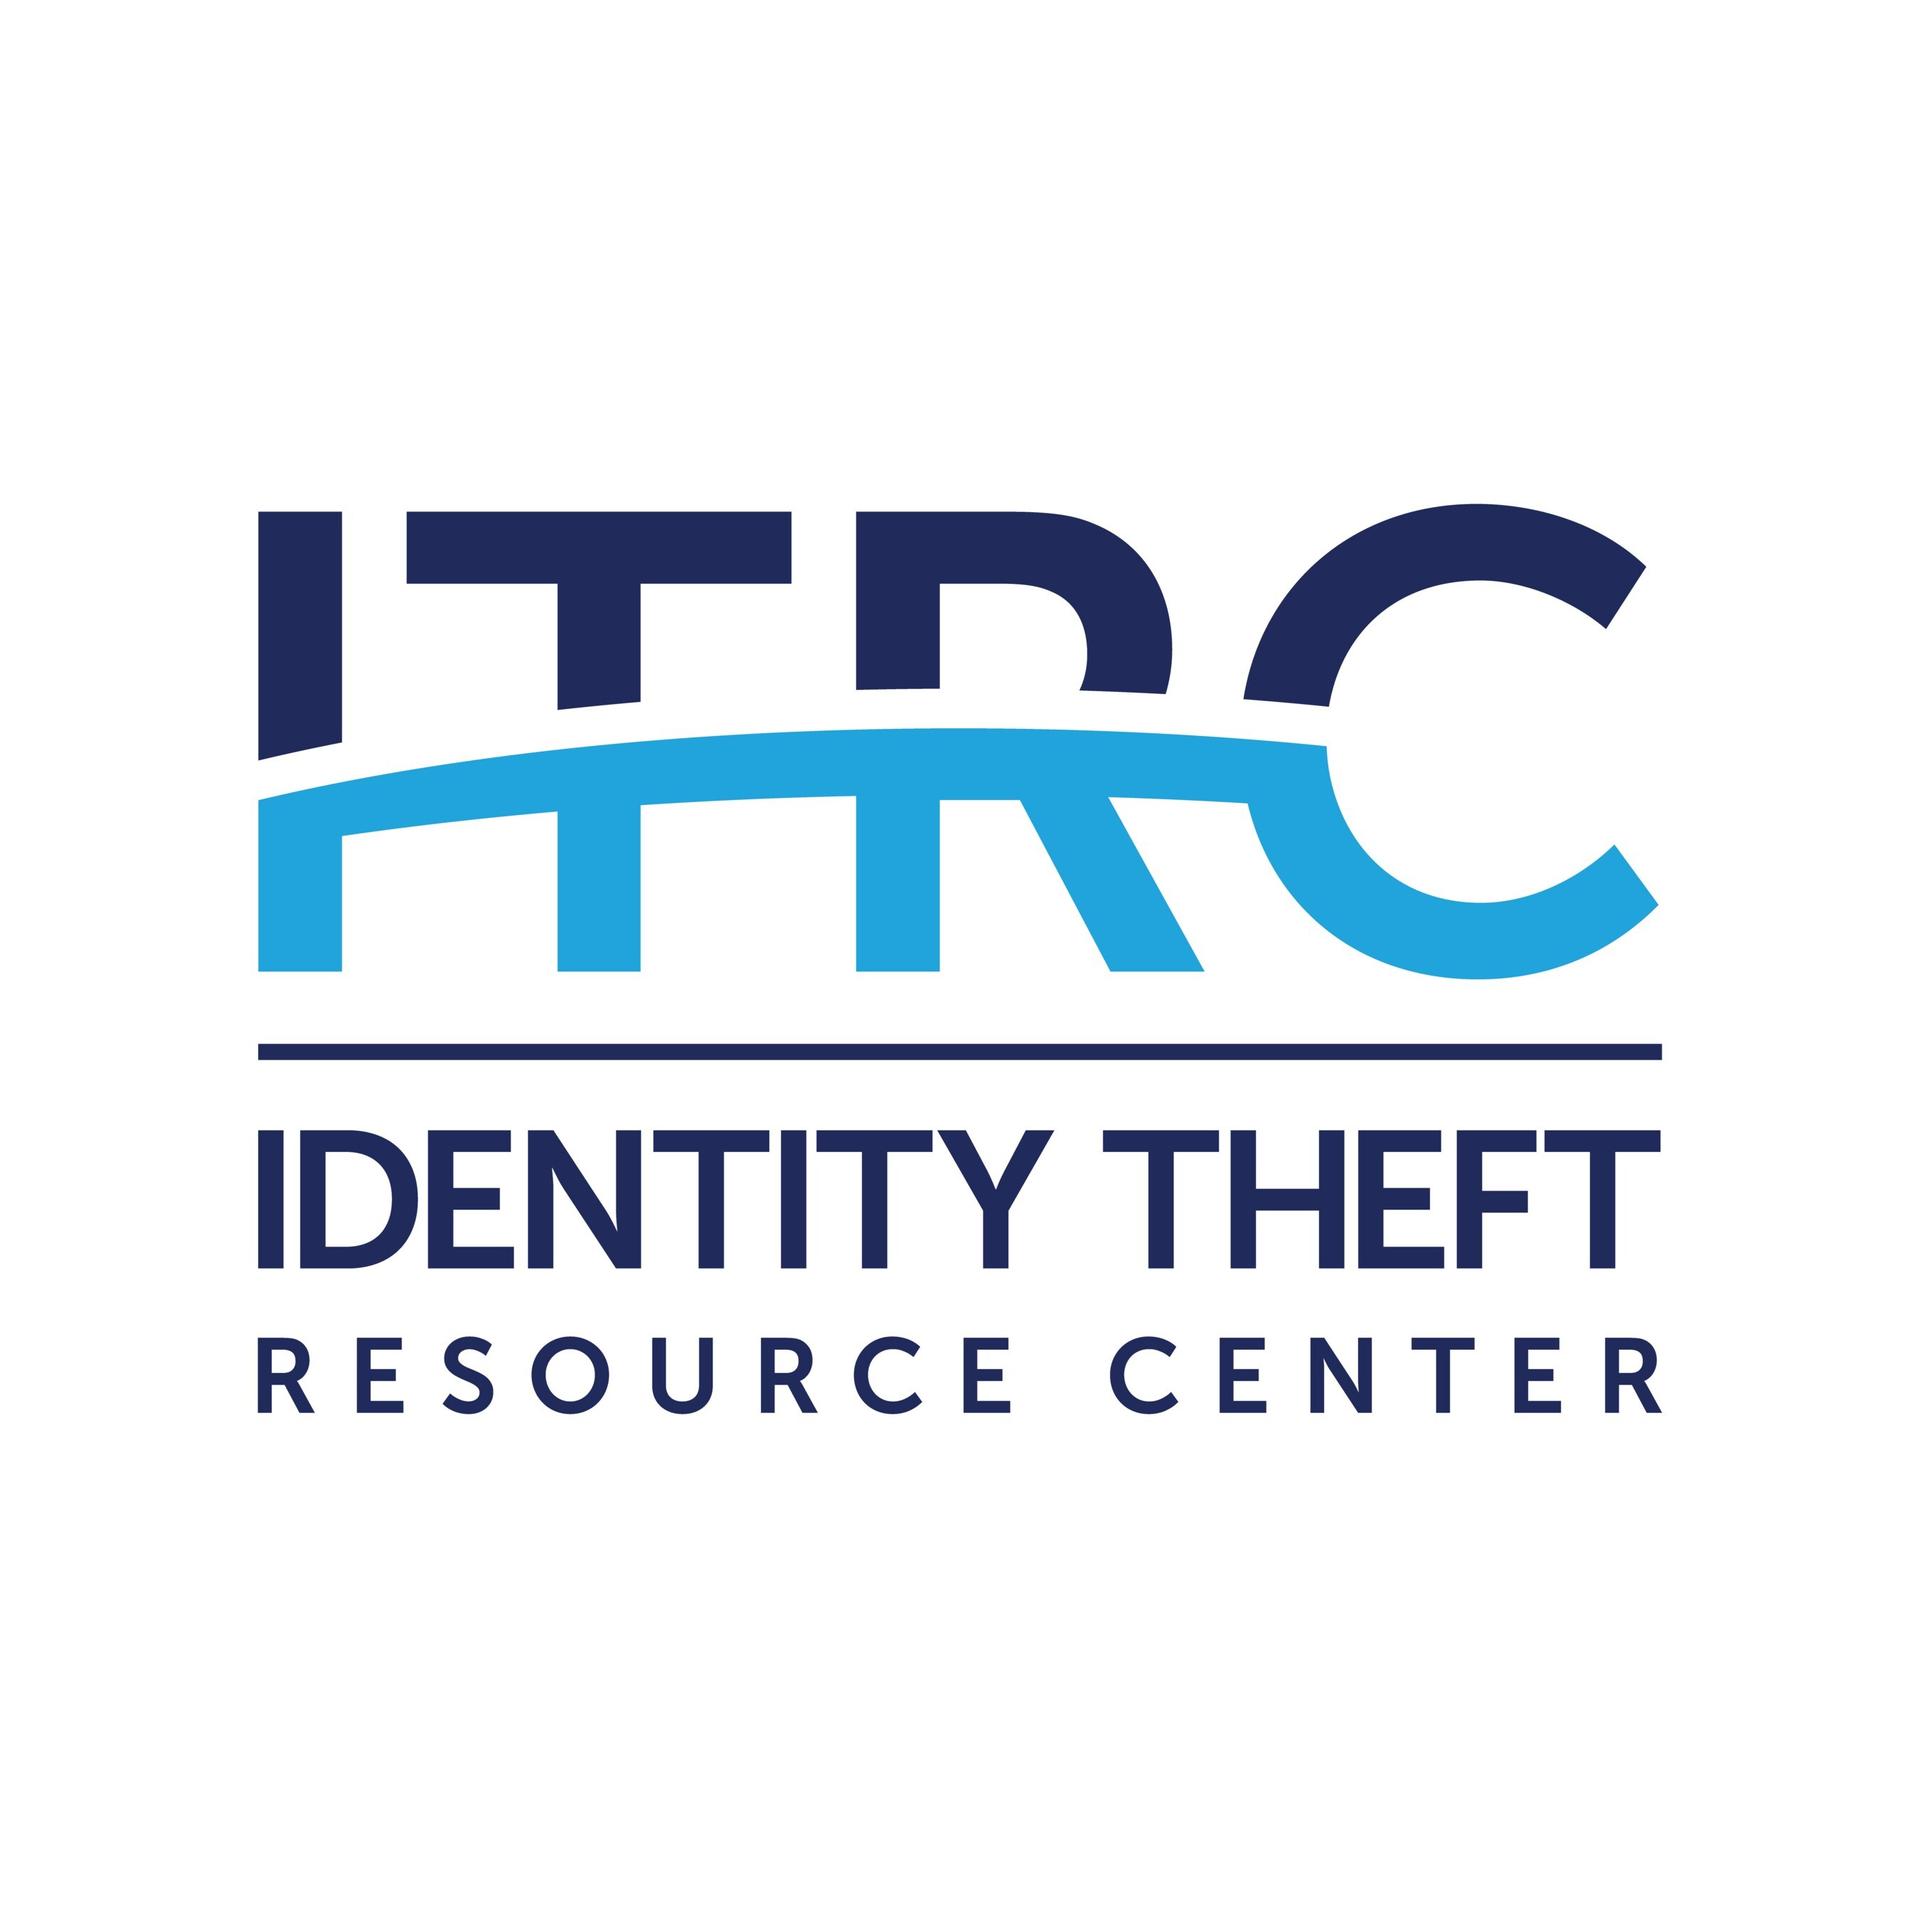 The Identity Theft Resource Center Receives Anonymous $1.4 Million Bitcoin Donation